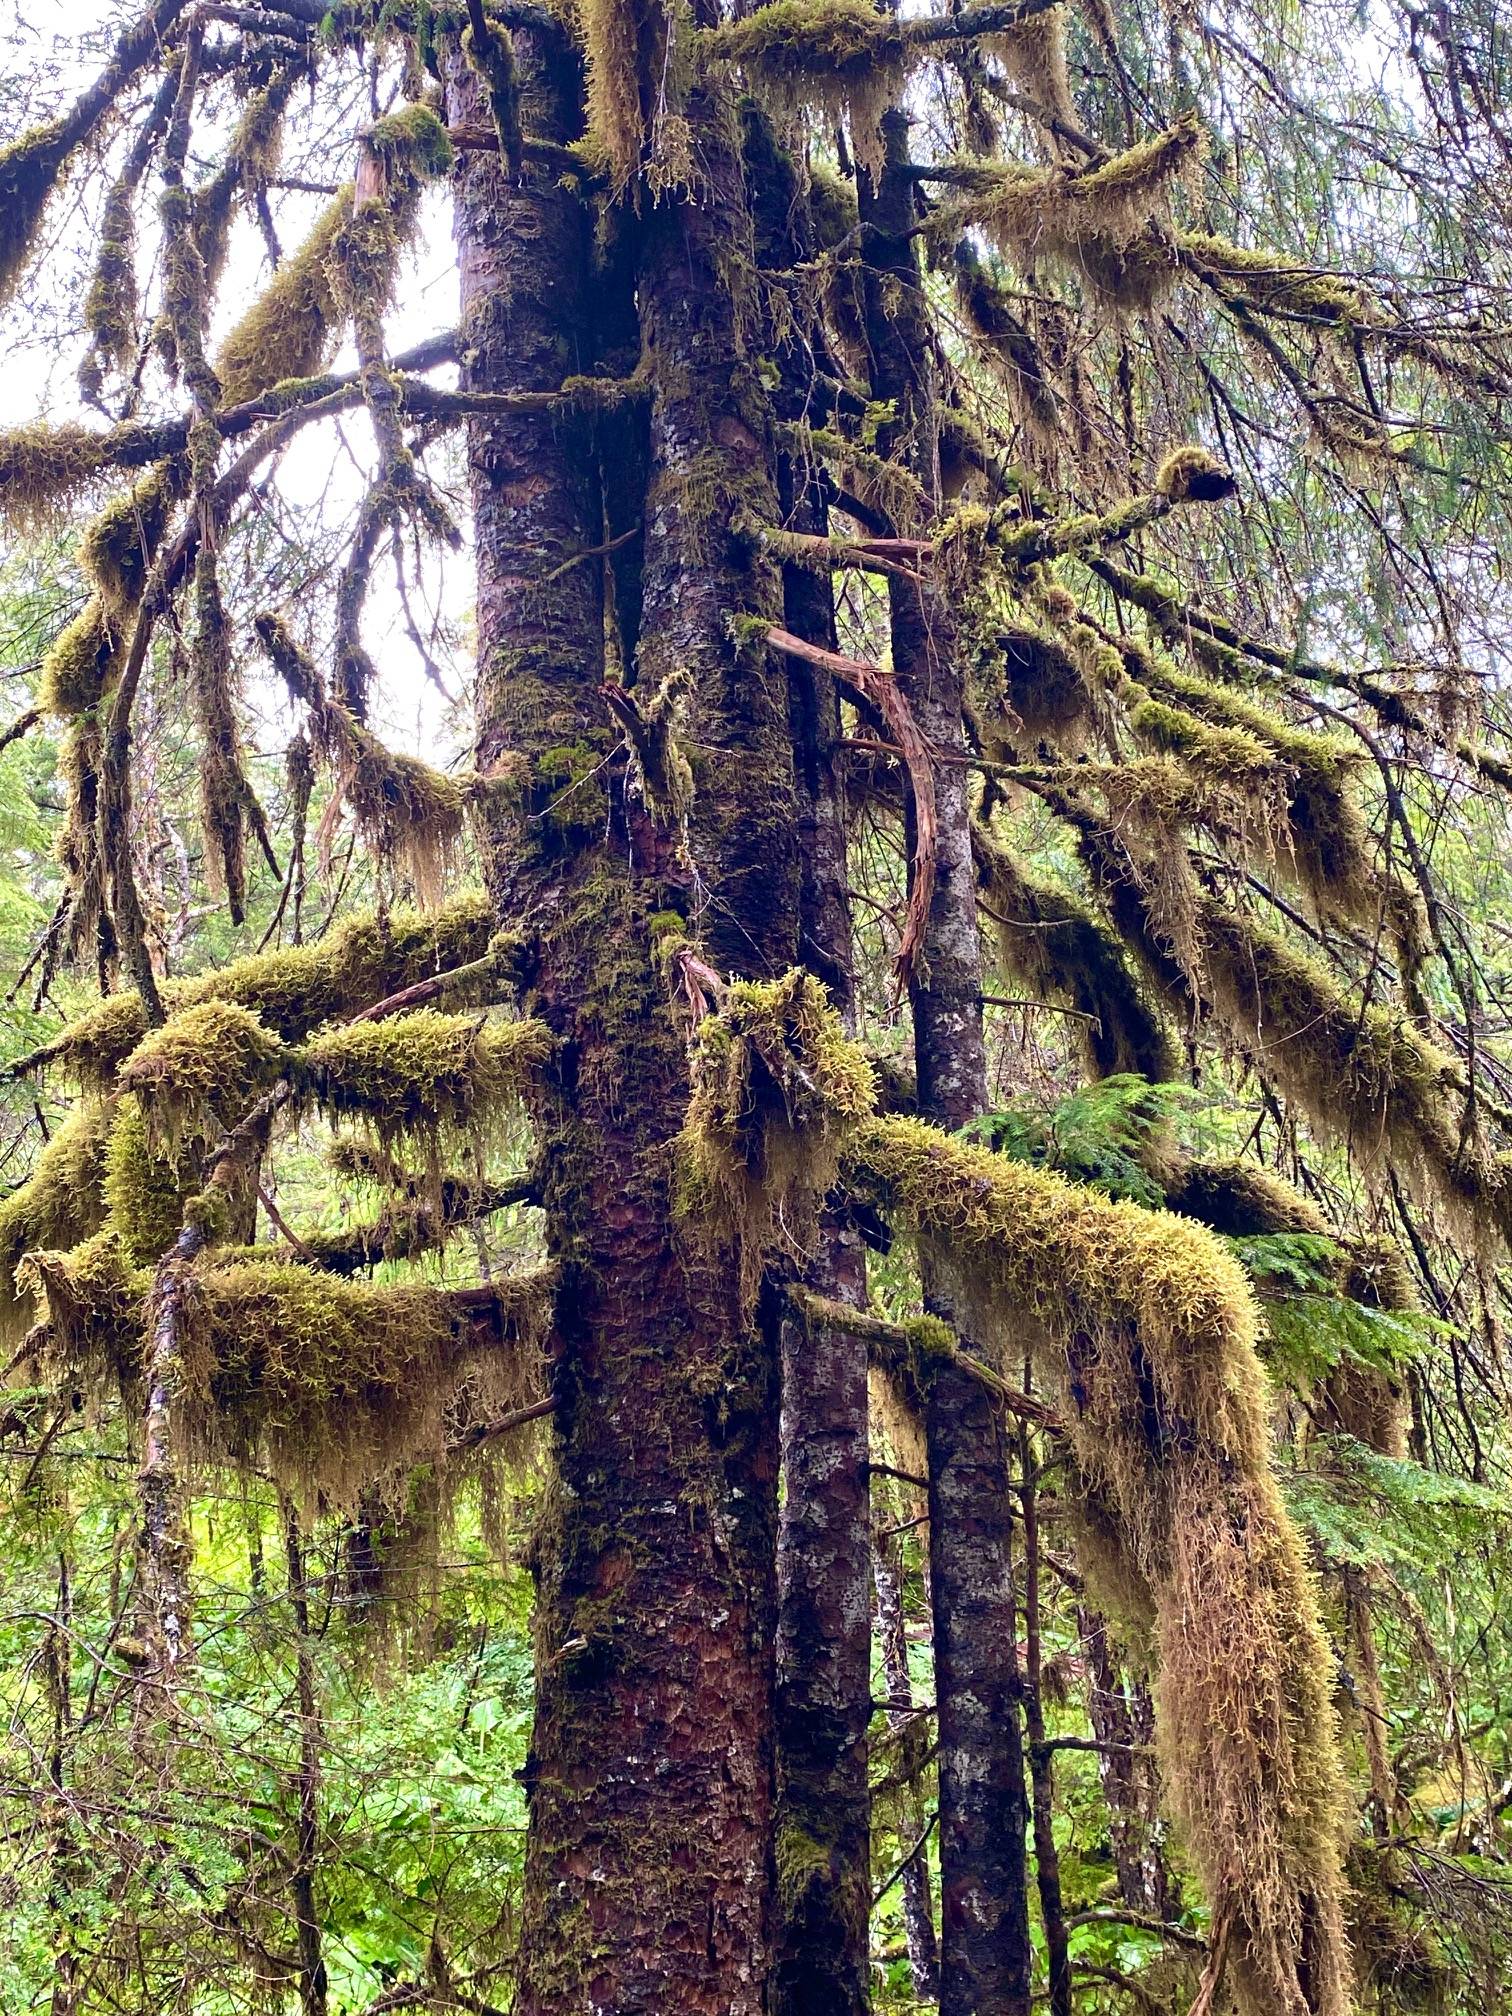 Thick velvety moss drapes over the branches of this evergreen tree along the Treadwell mine ruins Trail on Aug. 16, 2020. (Courtesy Photo / Denise Carroll)